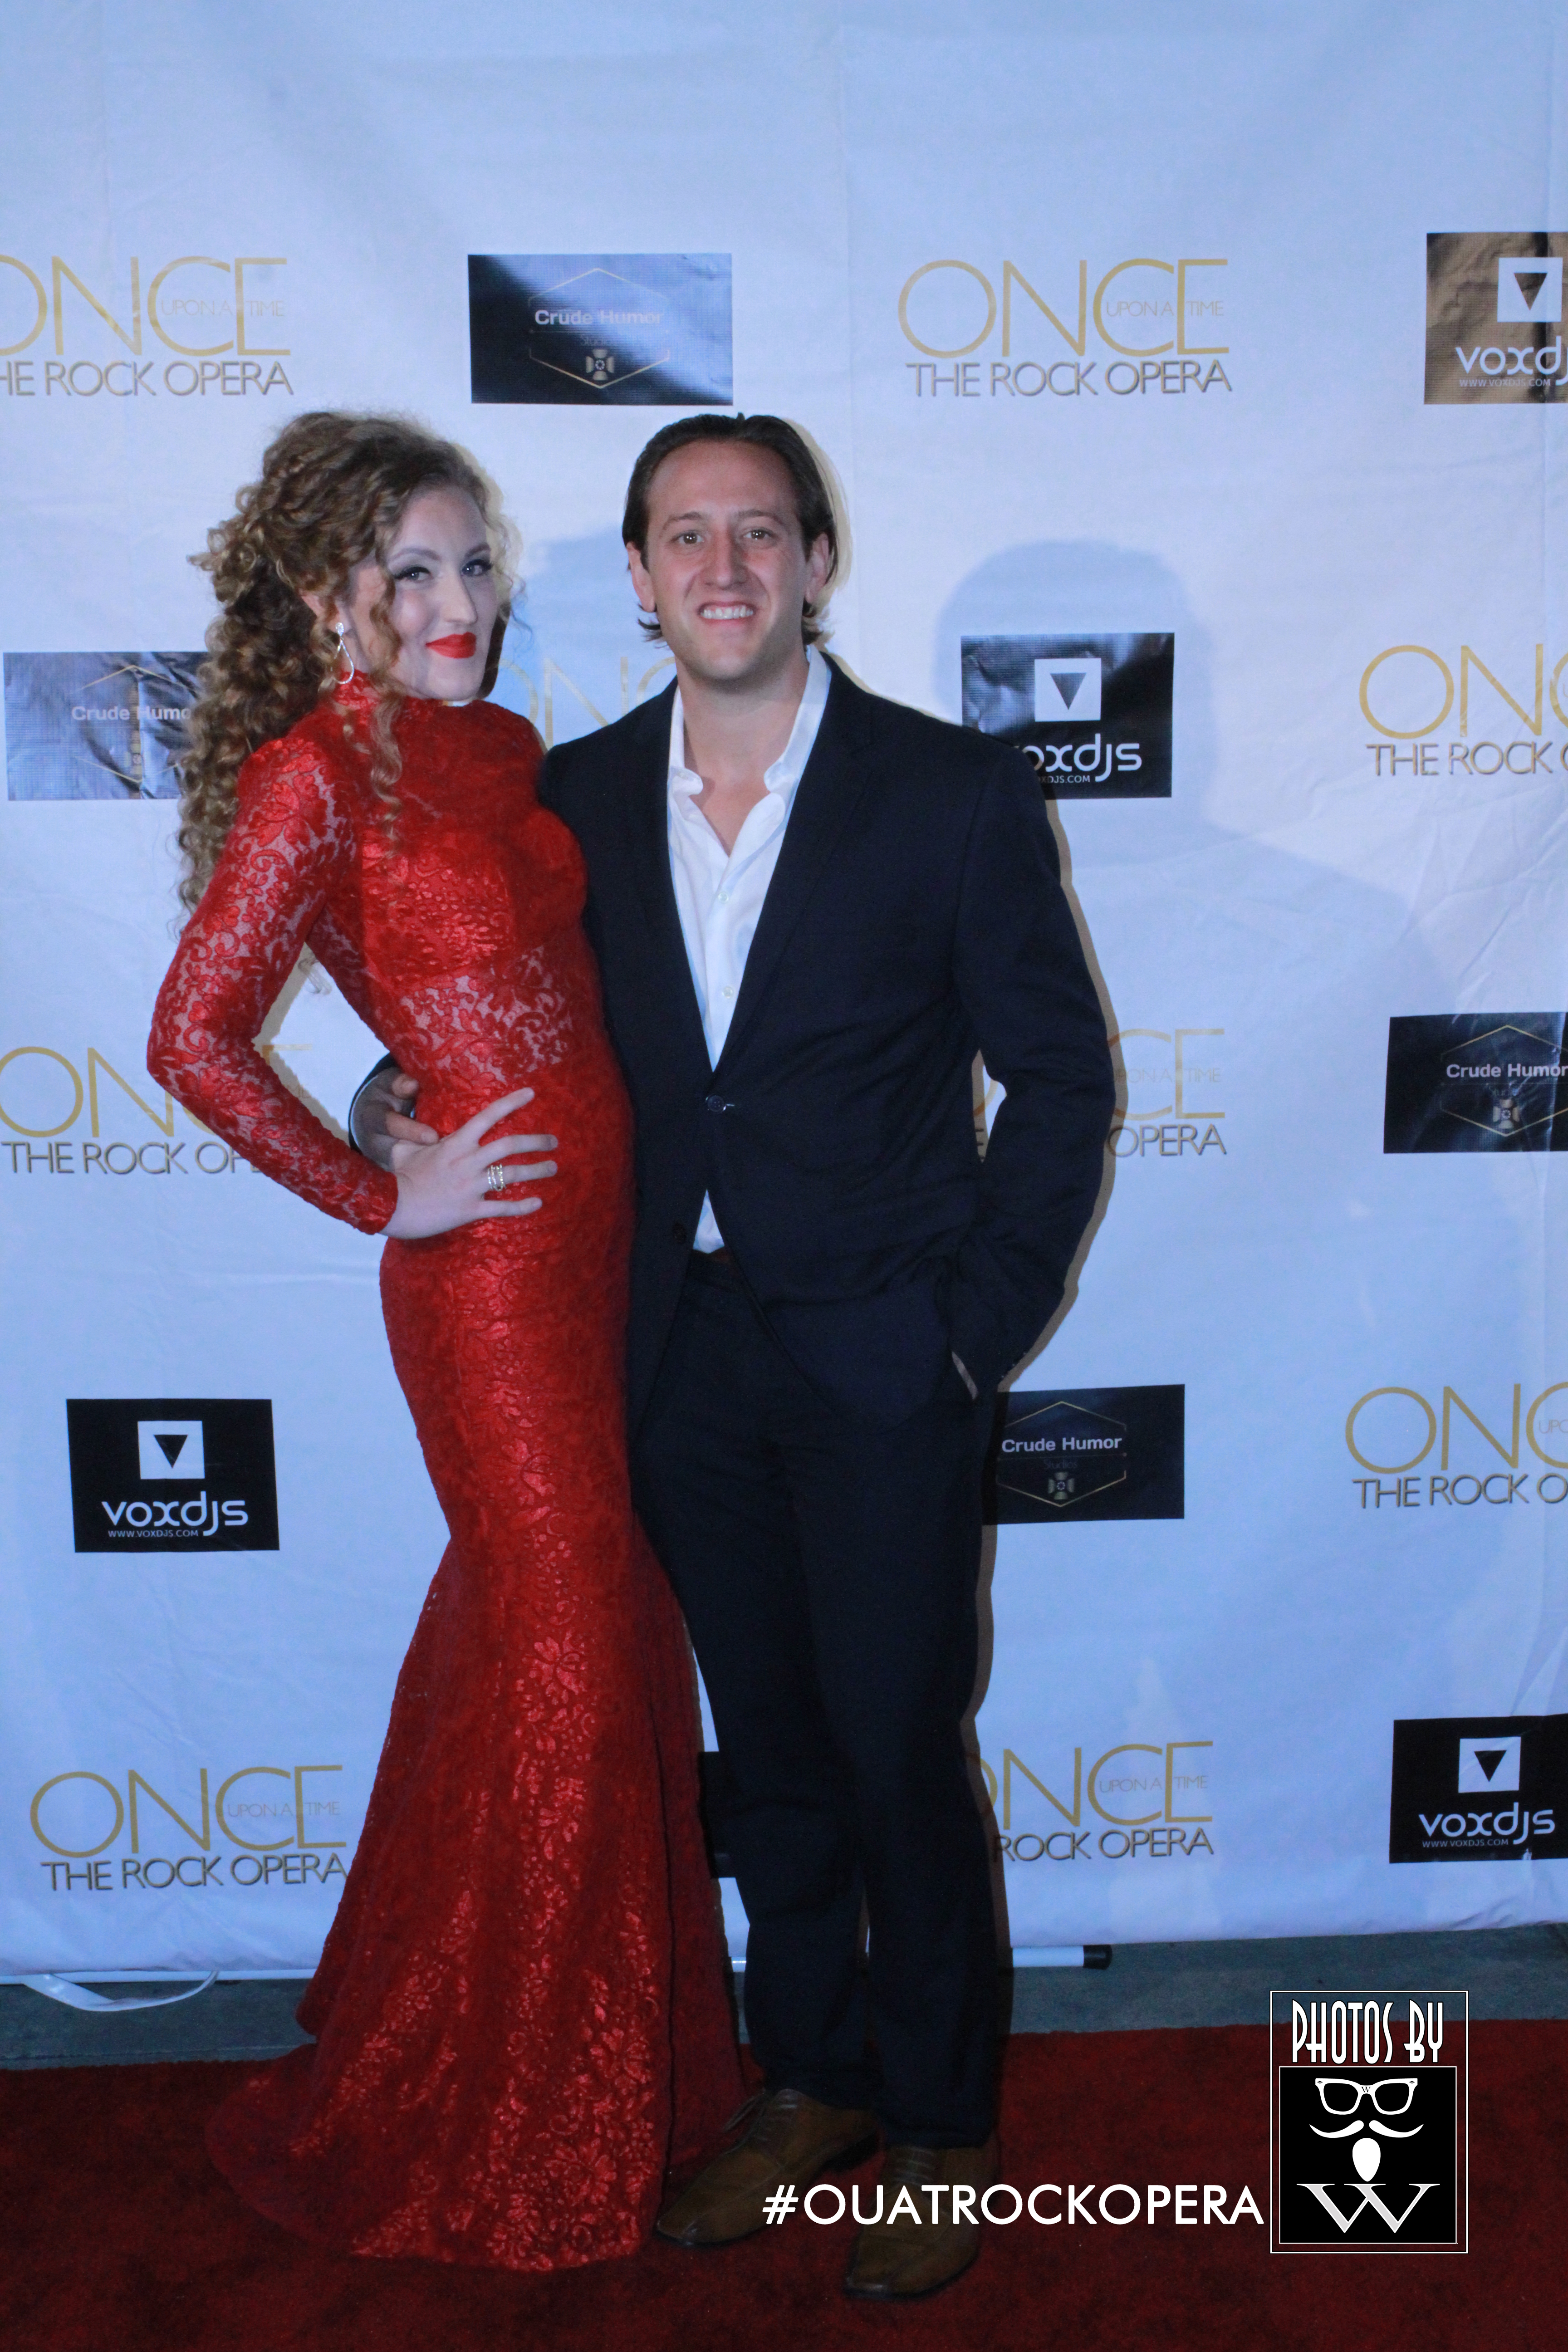 Once Upon A Time: The Rock Opera World Premiere